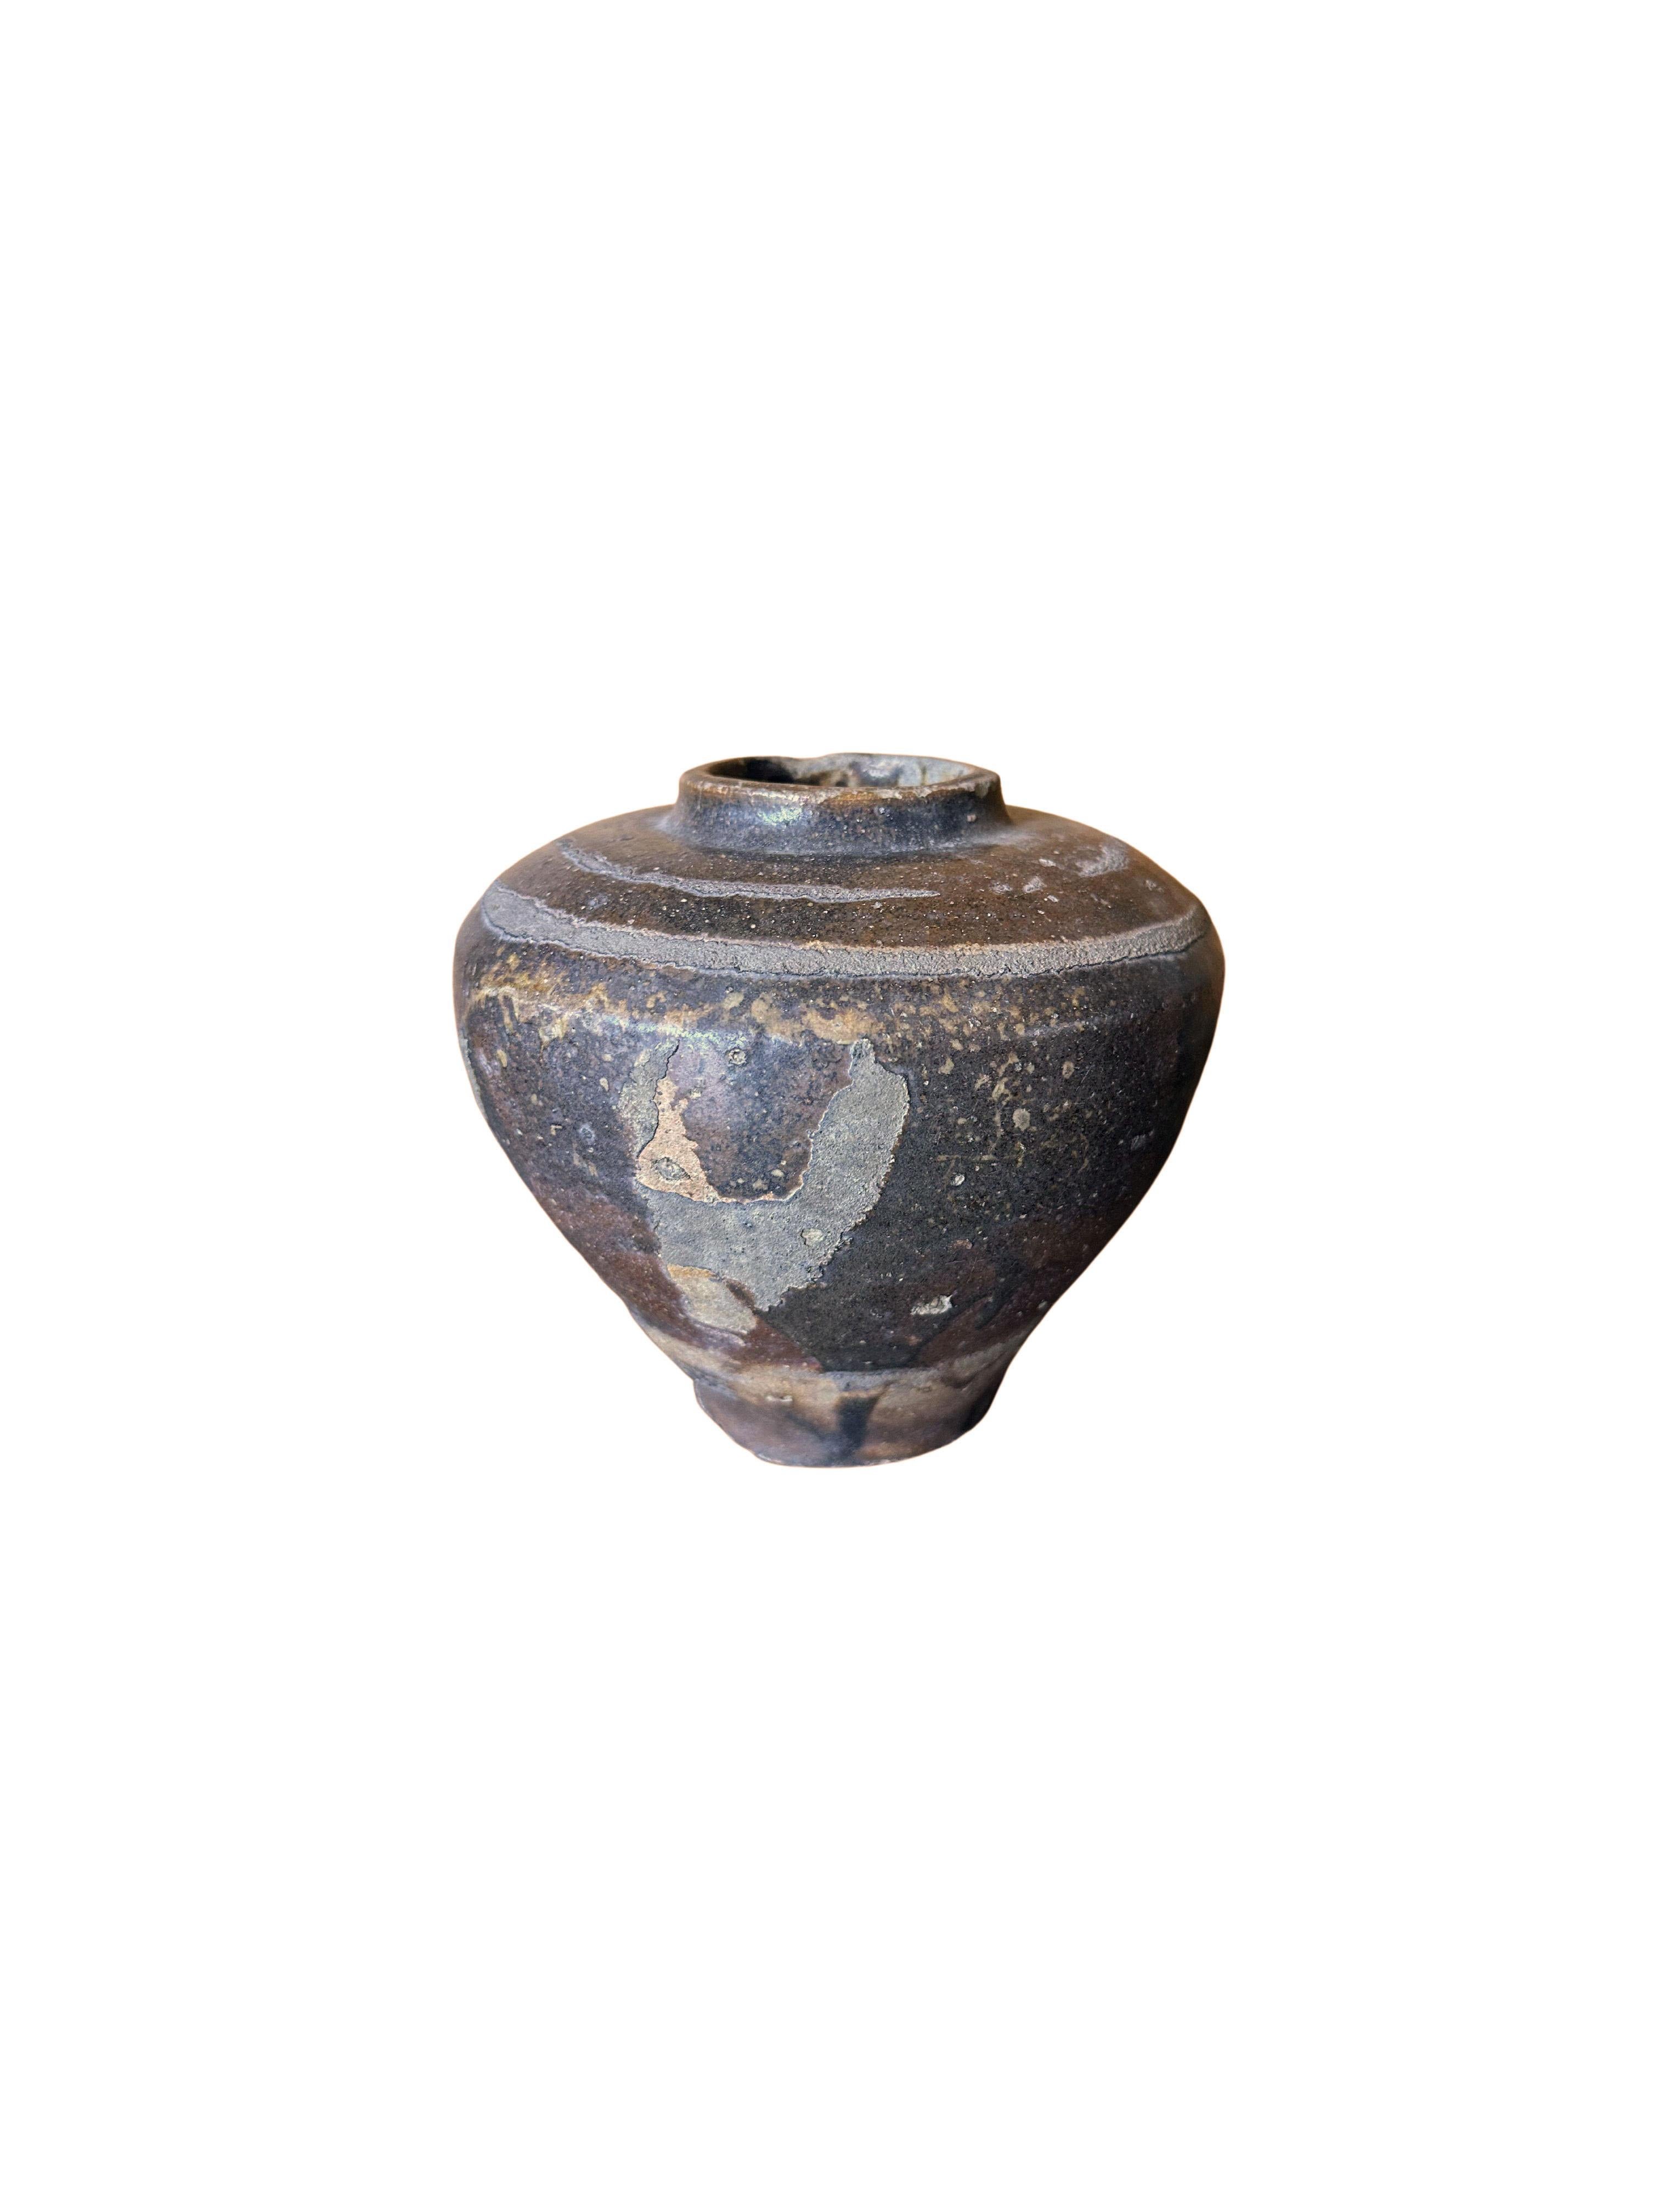 Chinese Glazed Ceramic Kitchen Jar c. 1950 In Good Condition For Sale In Jimbaran, Bali